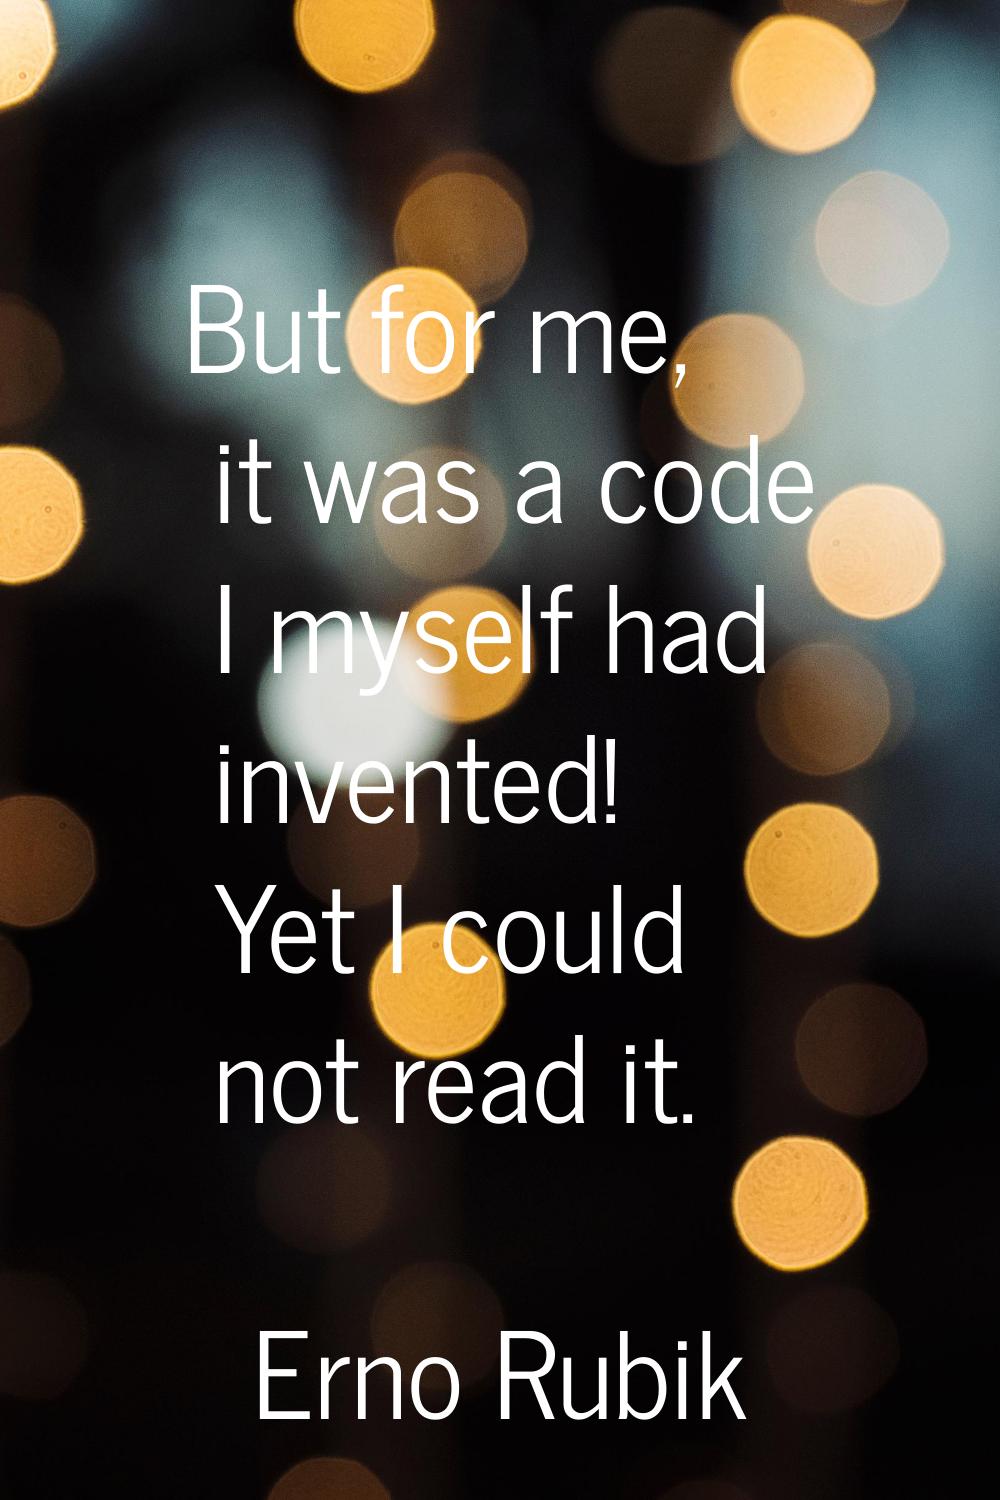 But for me, it was a code I myself had invented! Yet I could not read it.